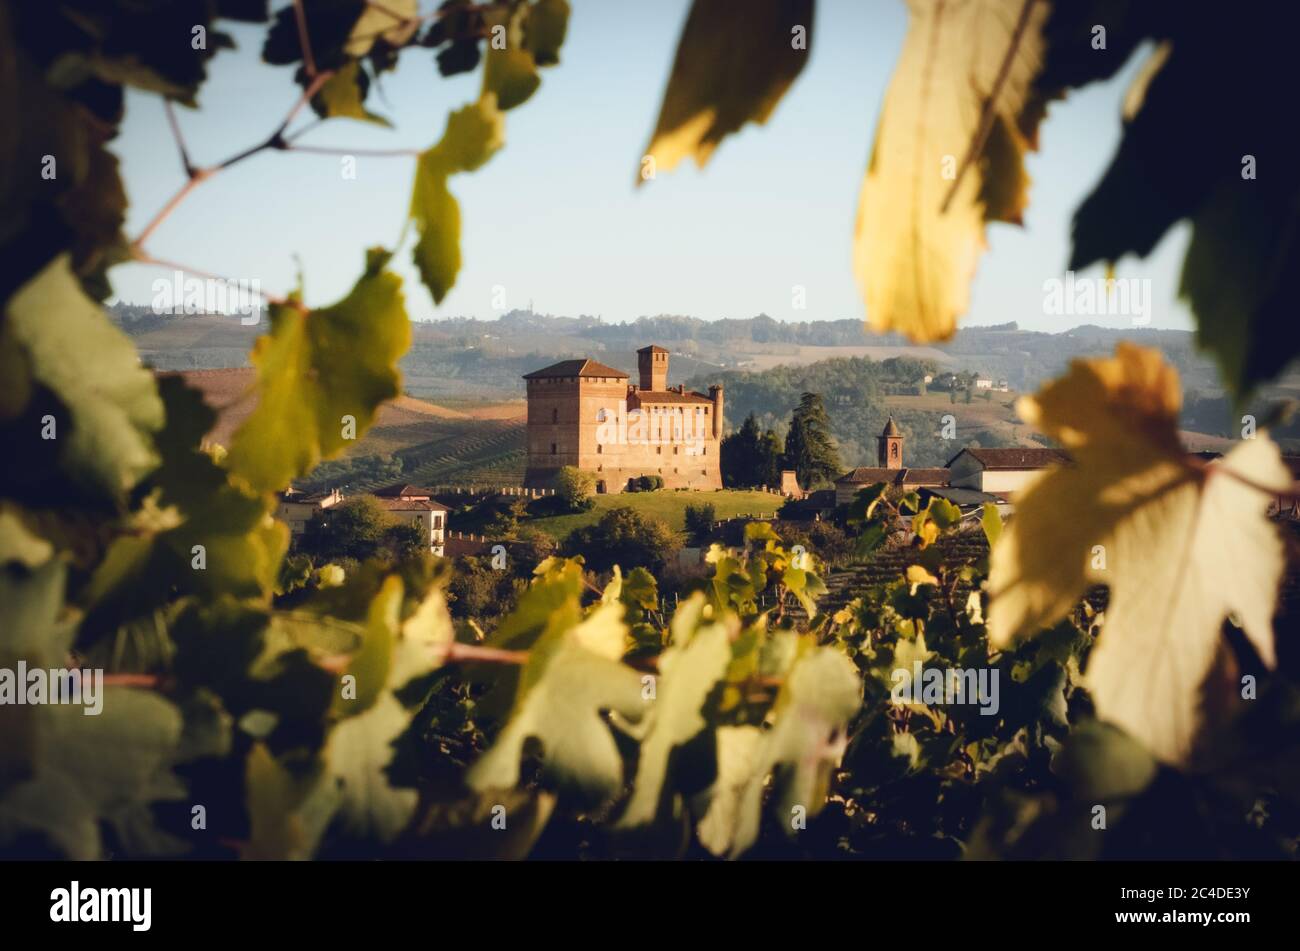 Sunset in autumn, during harvest time, at the castle of Grinzane Cavour, surrounded by the vineyards of Langhe, the most importan wine district of Ita Stock Photo